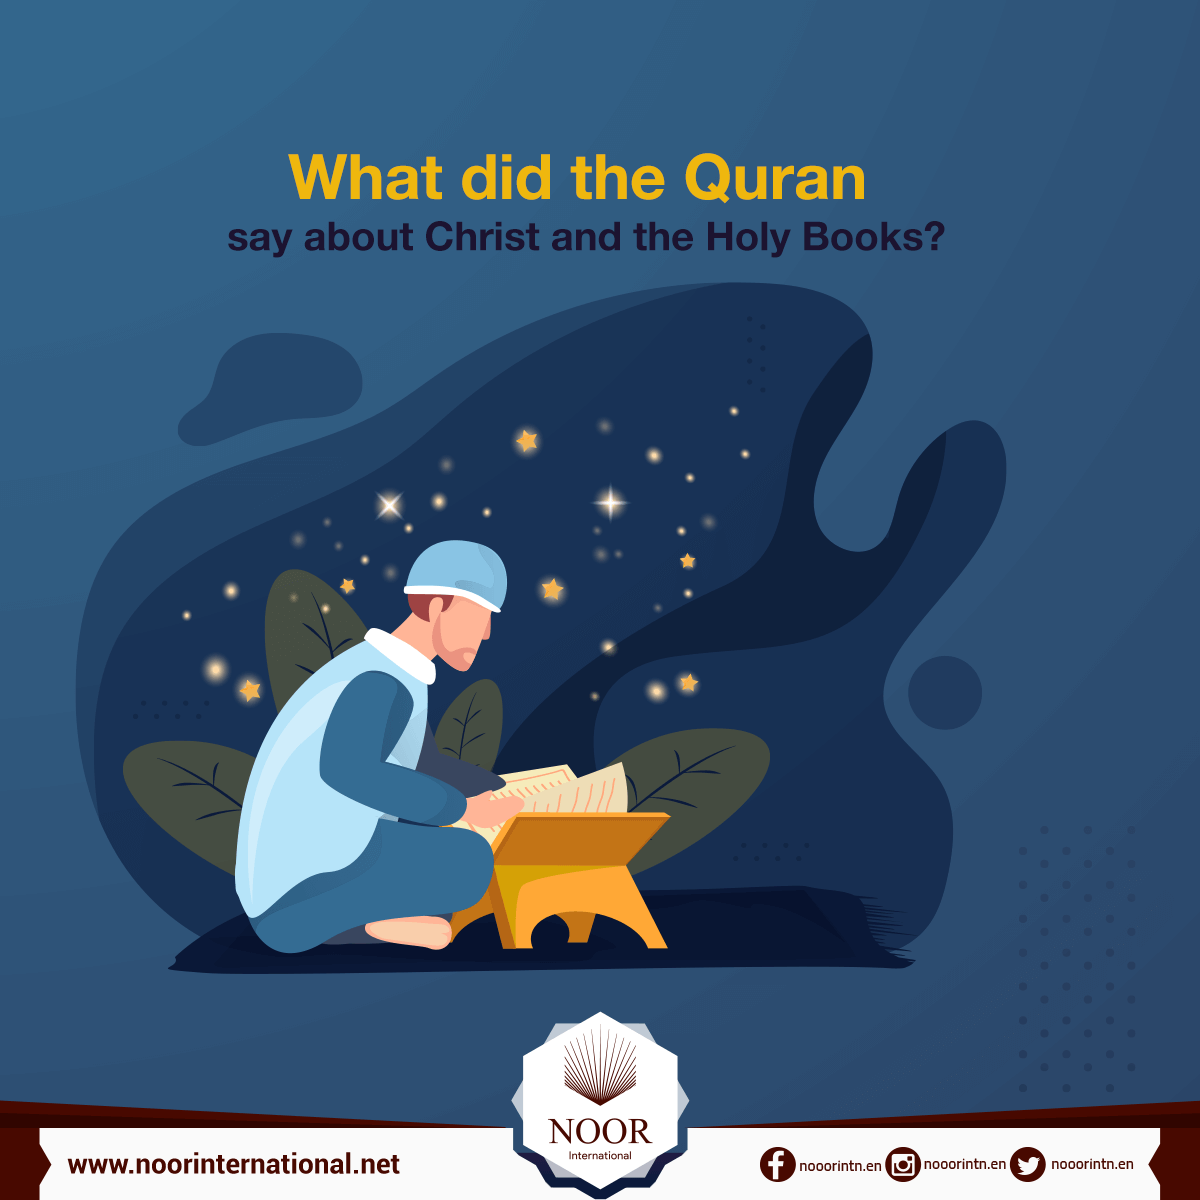 What did the Quran say about Christ and the Holy Books?